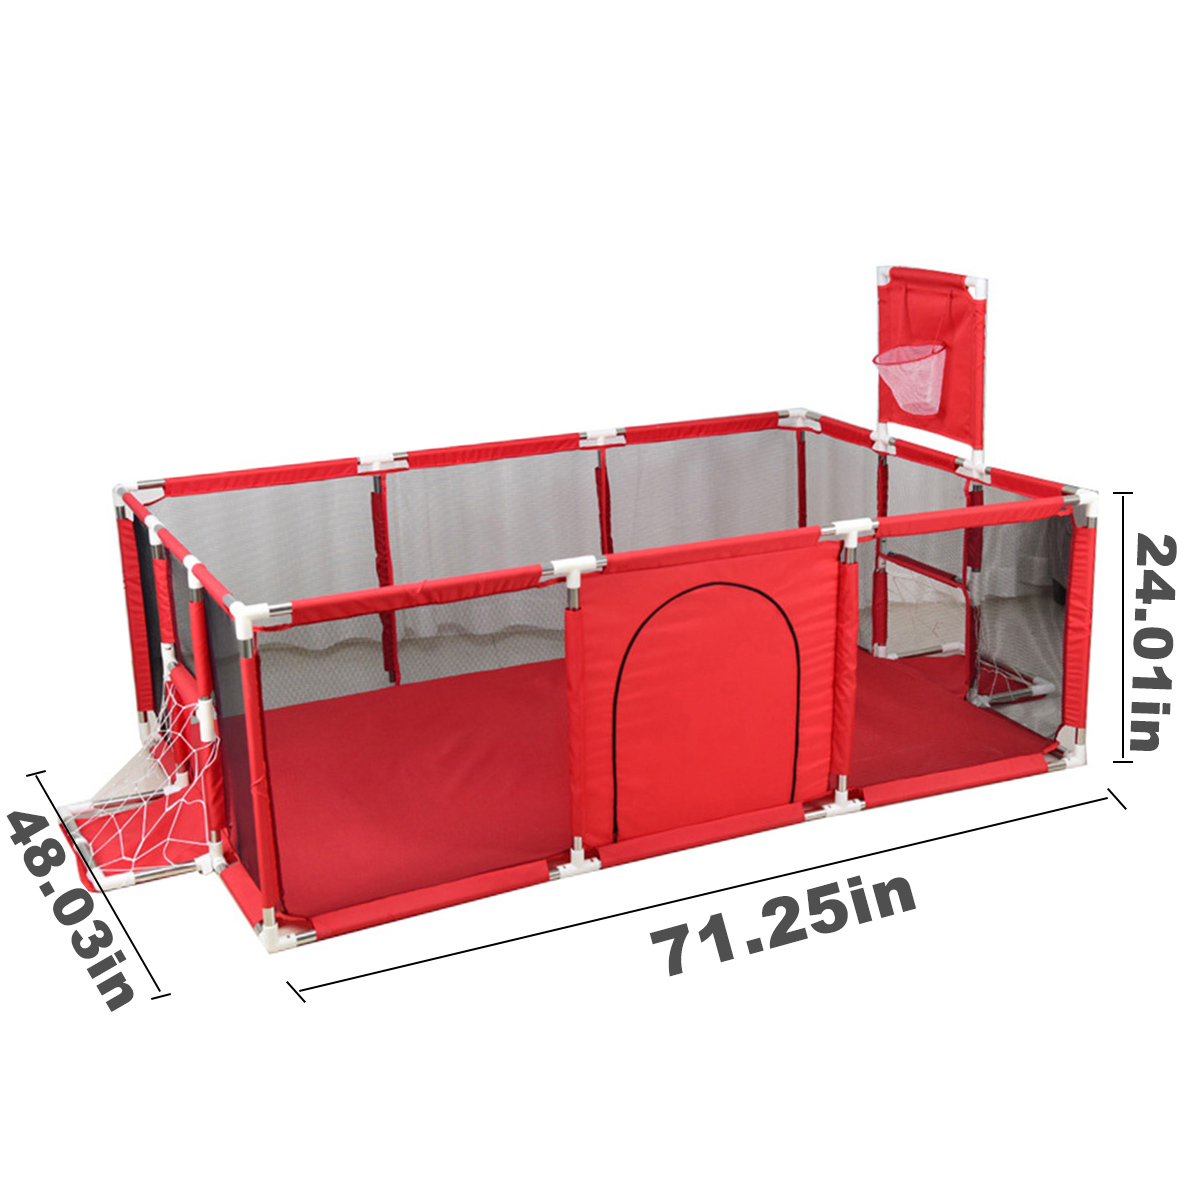 3-in-1-Baby-Playpen-Interactive-Safety-Indoor-Gate-Play-Yards-Tent-Basketball-Court-Kids-Furniture-f-1693785-16